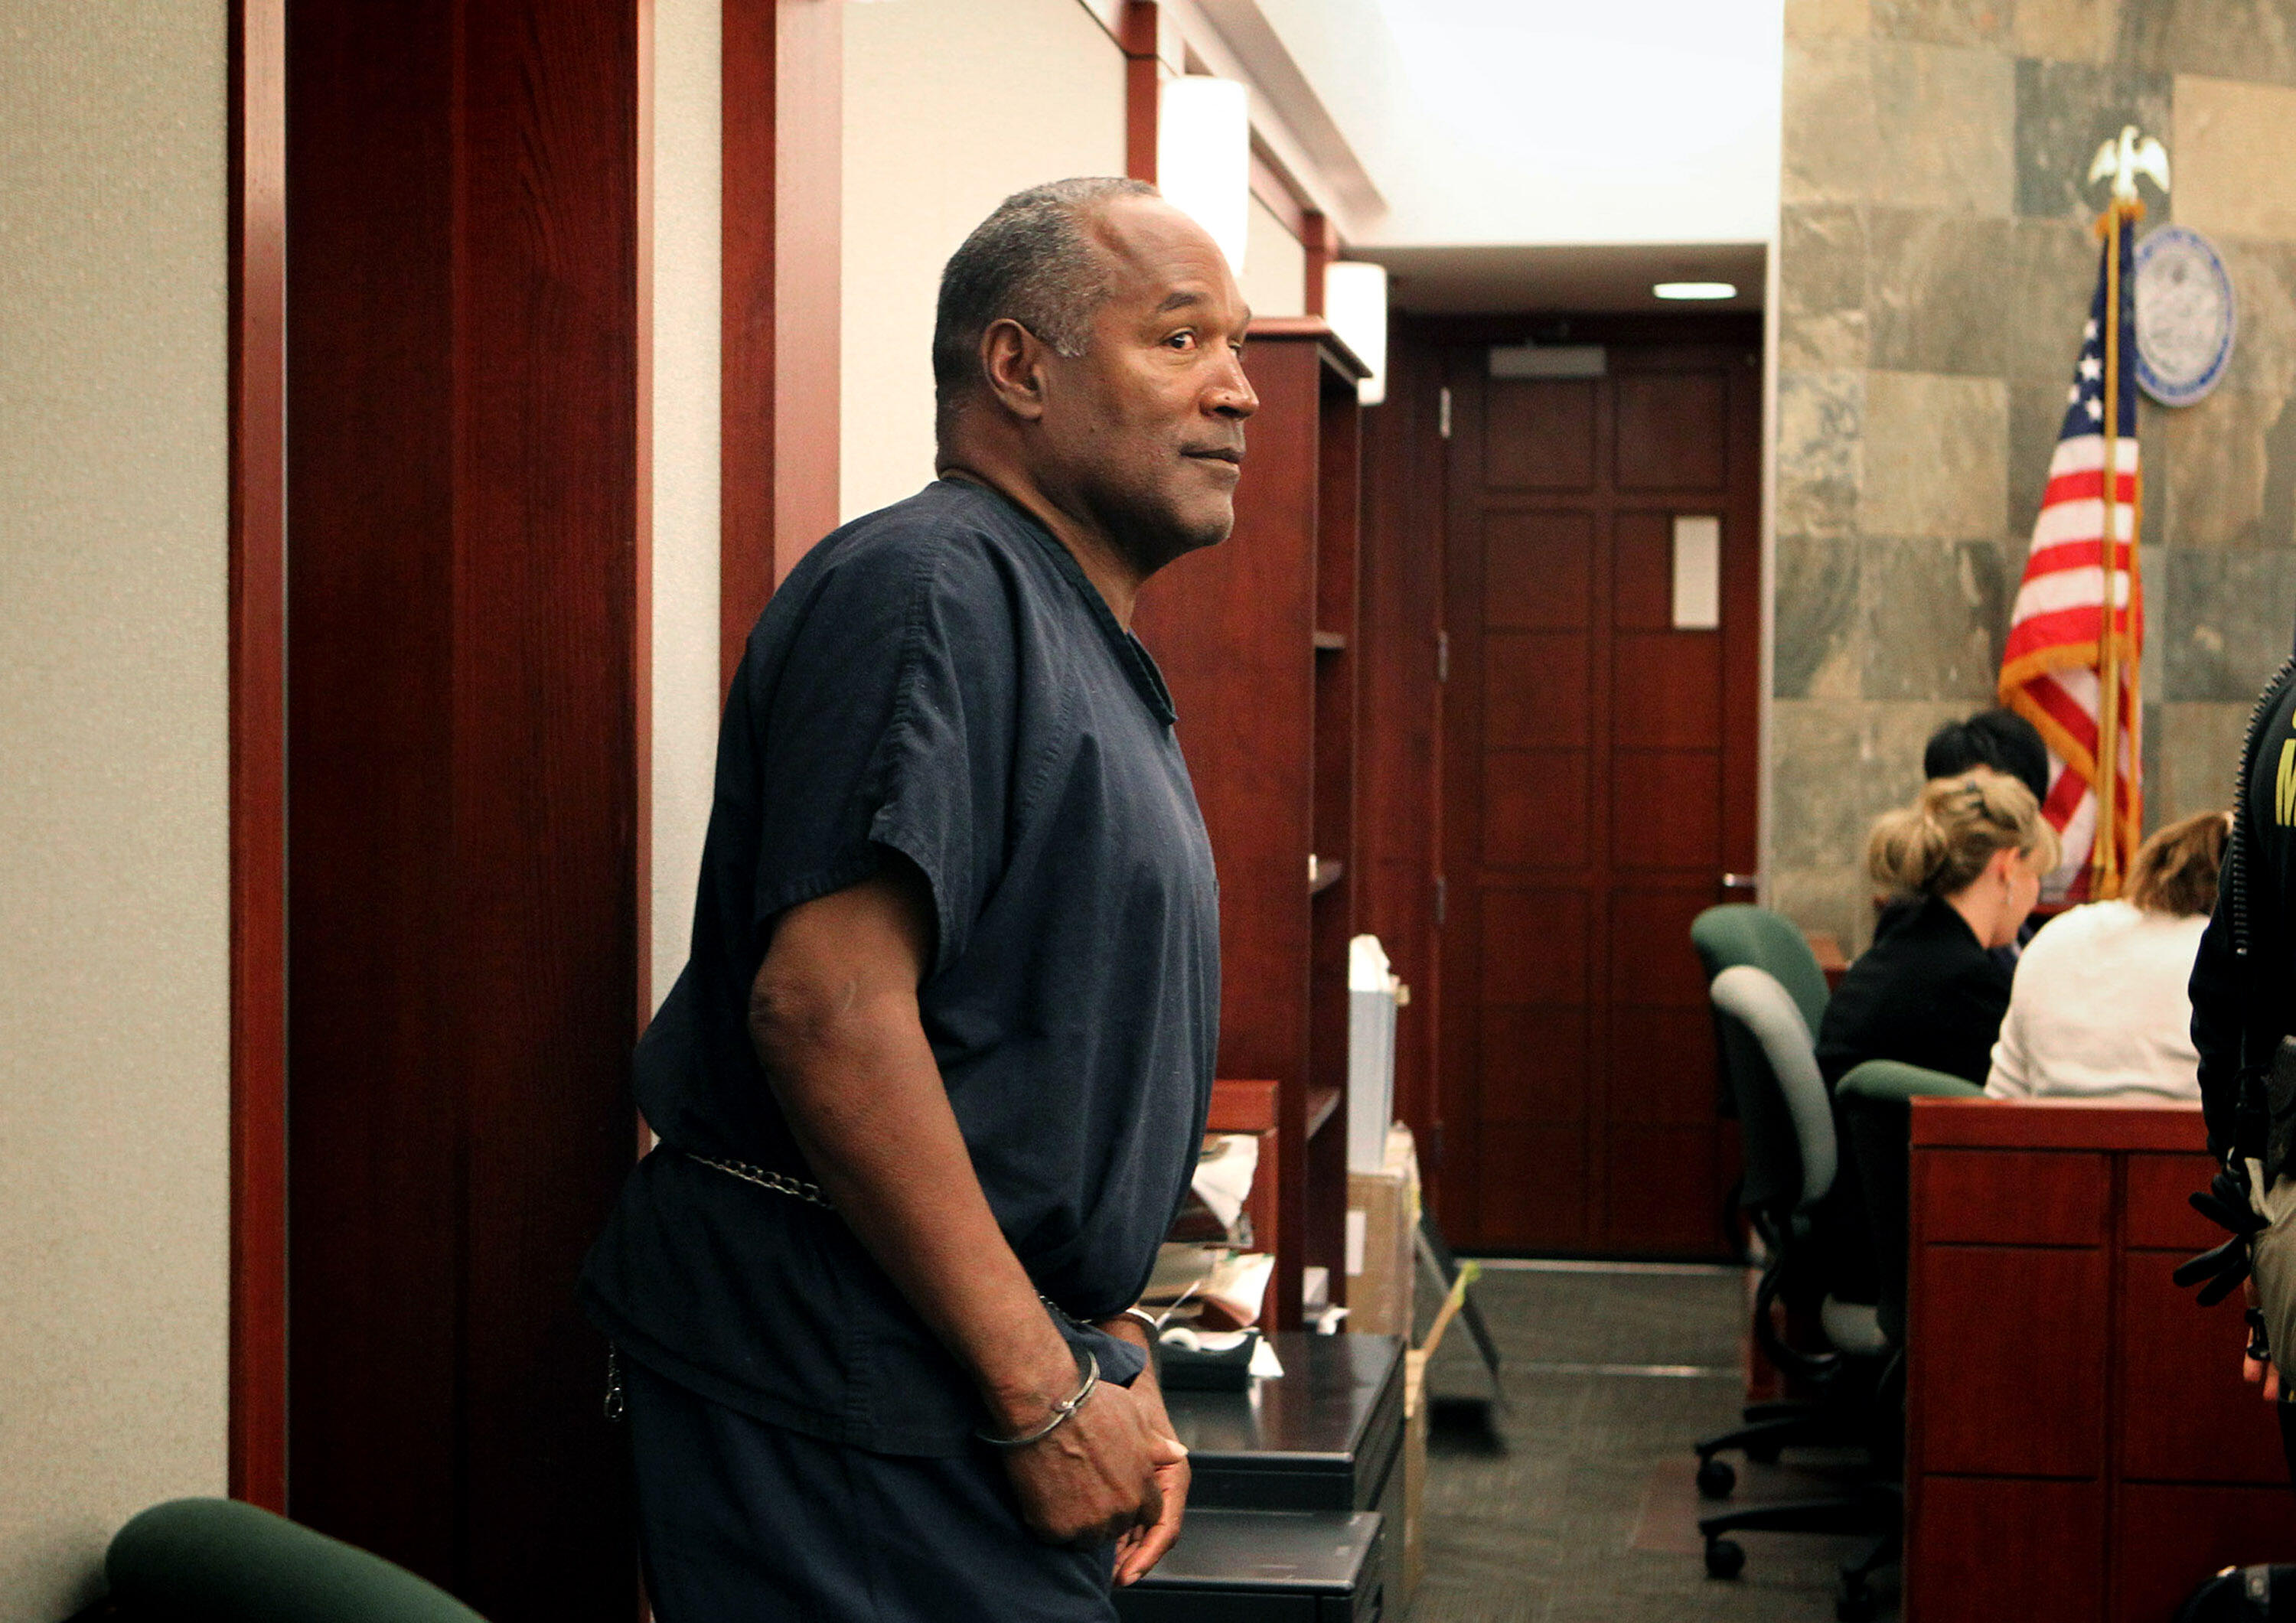 LAS VEGAS, NV - MAY 15:  O.J. Simpson arrives after a lunch break during an evidentiary hearing in Clark County District Court May 15, 2013 in Las Vegas, Nevada. Simpson, who is currently serving a nine to 33-year sentence in state prison as a result of h